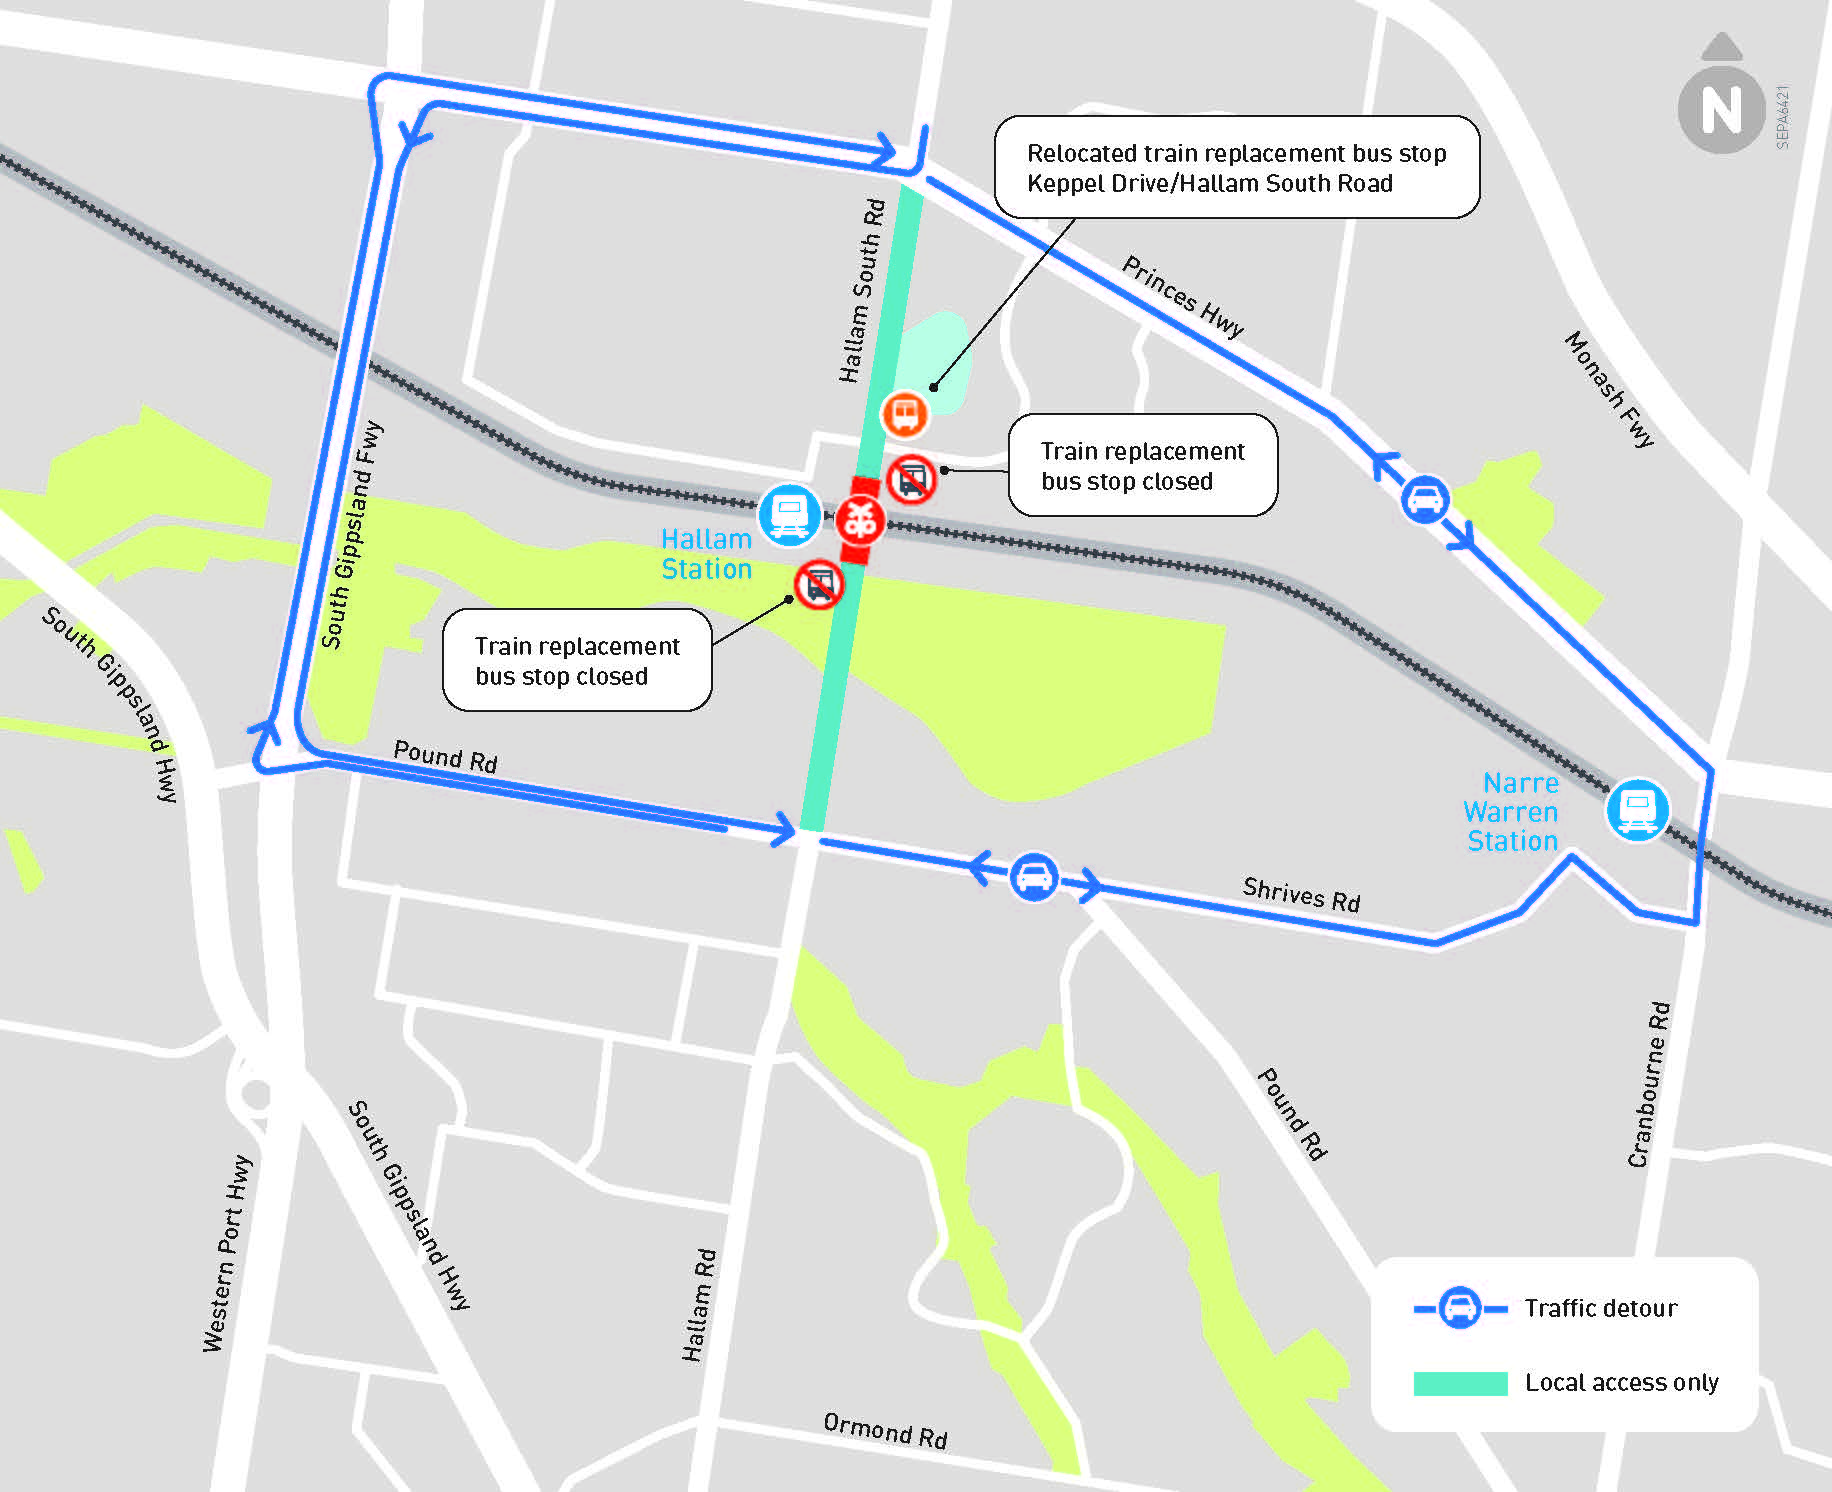 Hallam Road closure and bus stop relocation - click to view larger version of map